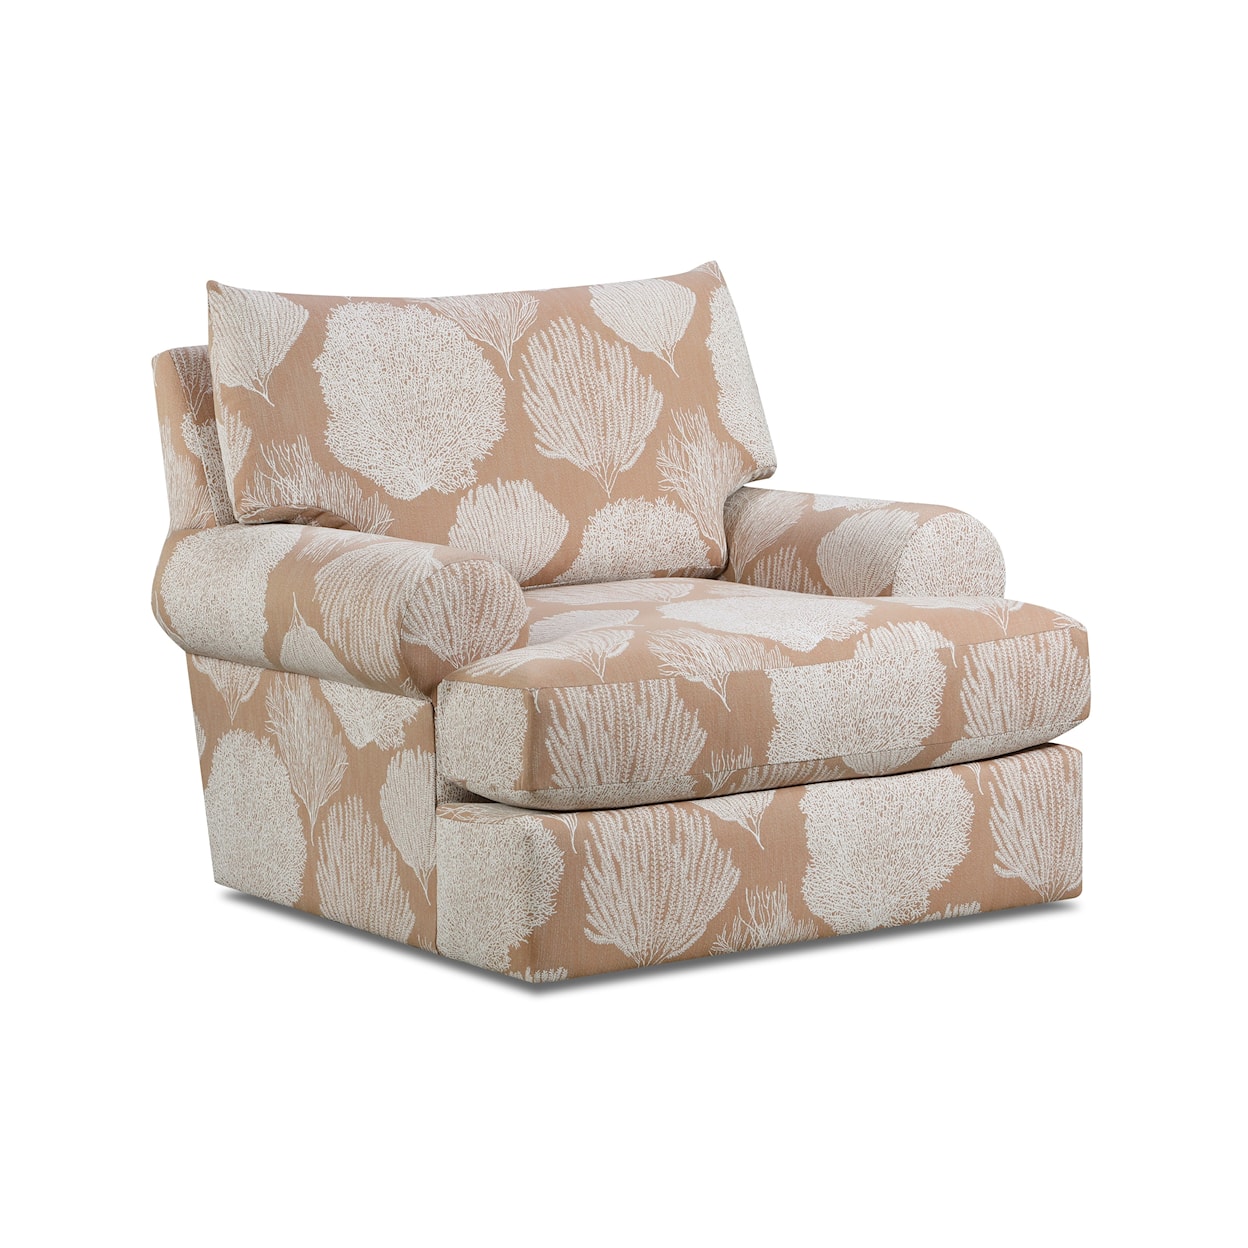 The Mix Margo Matching Swivel Chair